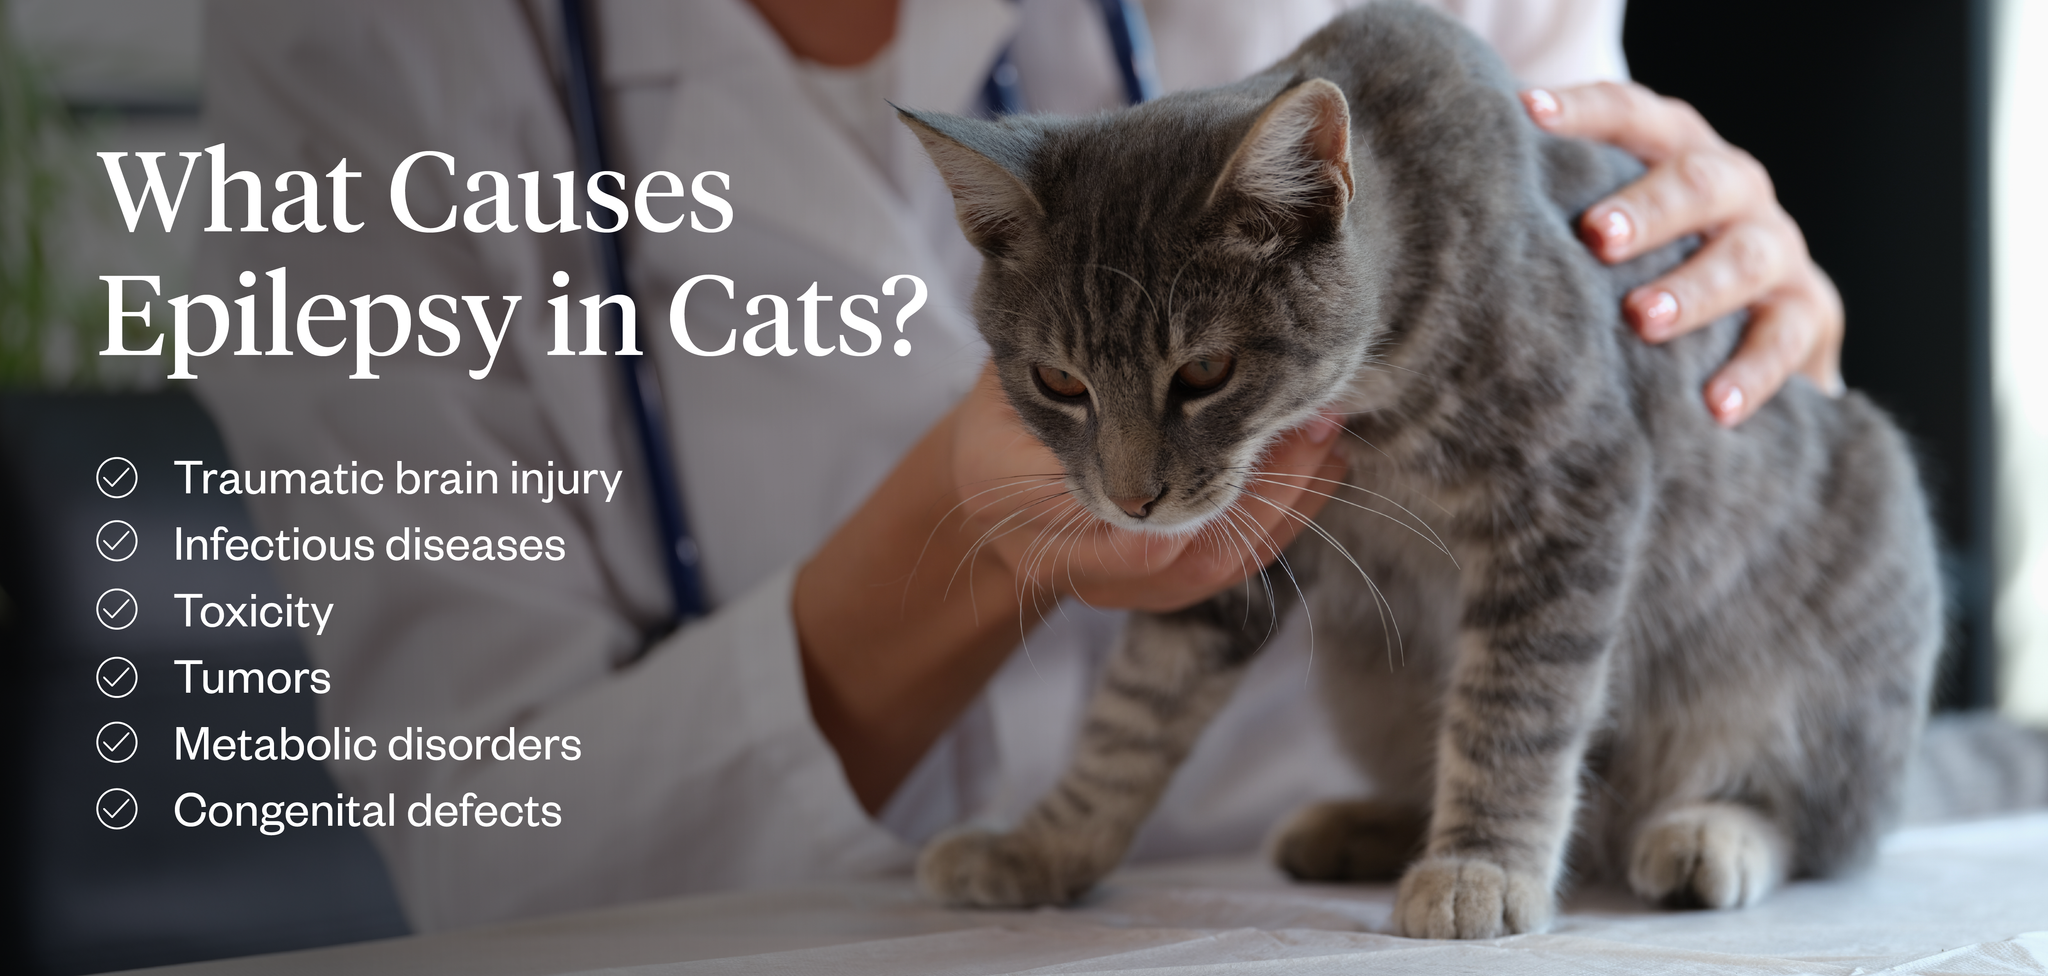 List of the causes of epilepsy in cats